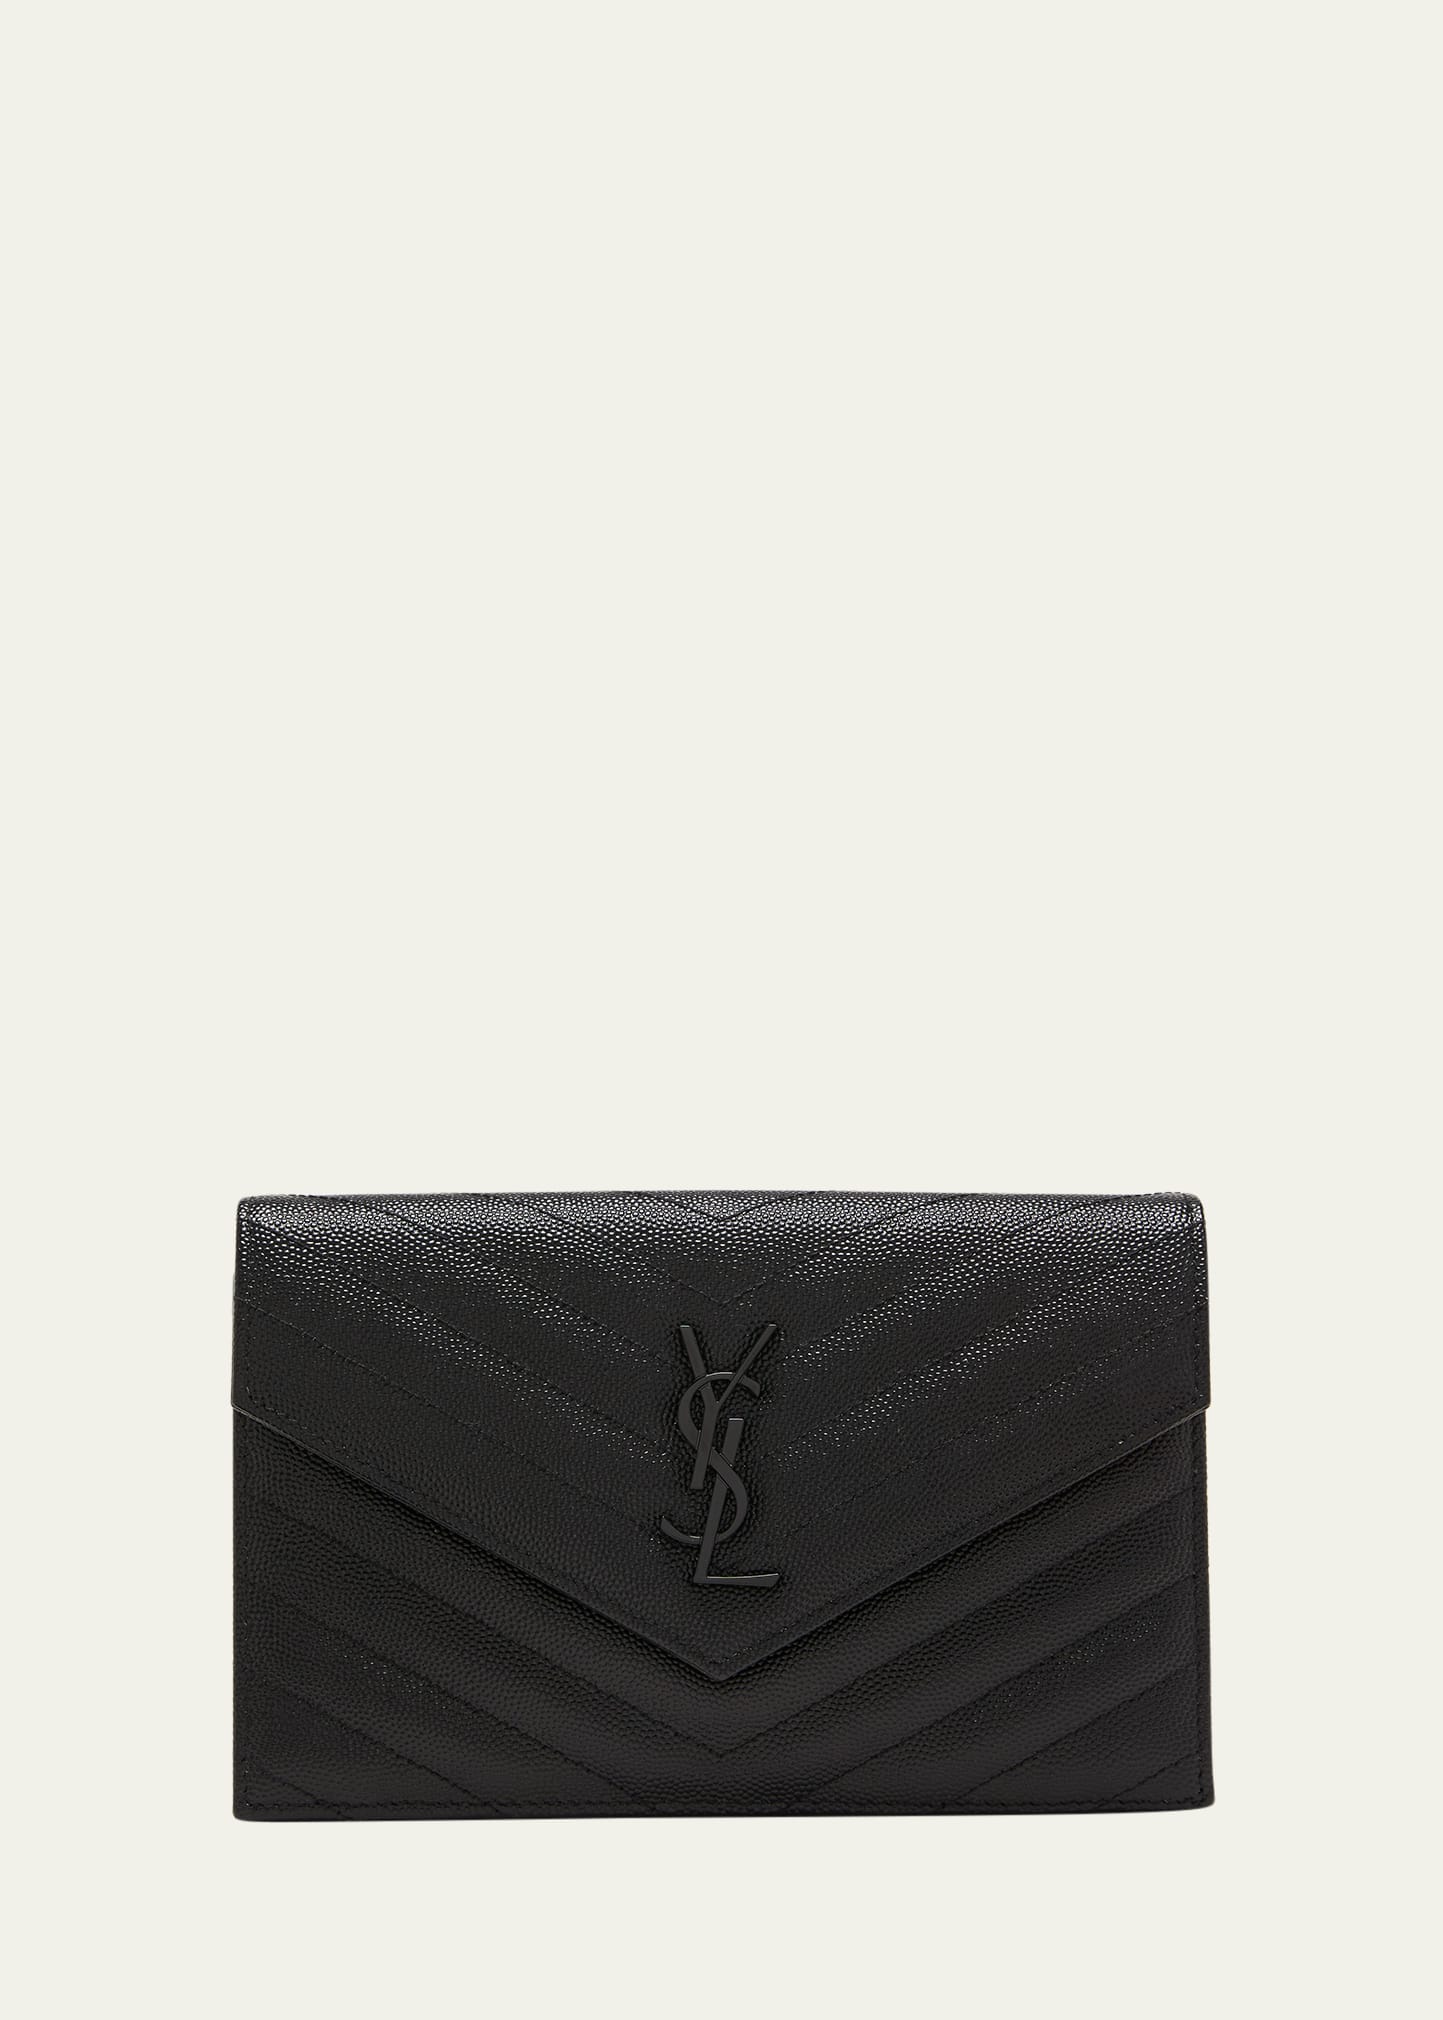 Saint Laurent Ysl Small Envelope Leather Wallet On Chain In 1000 Noir